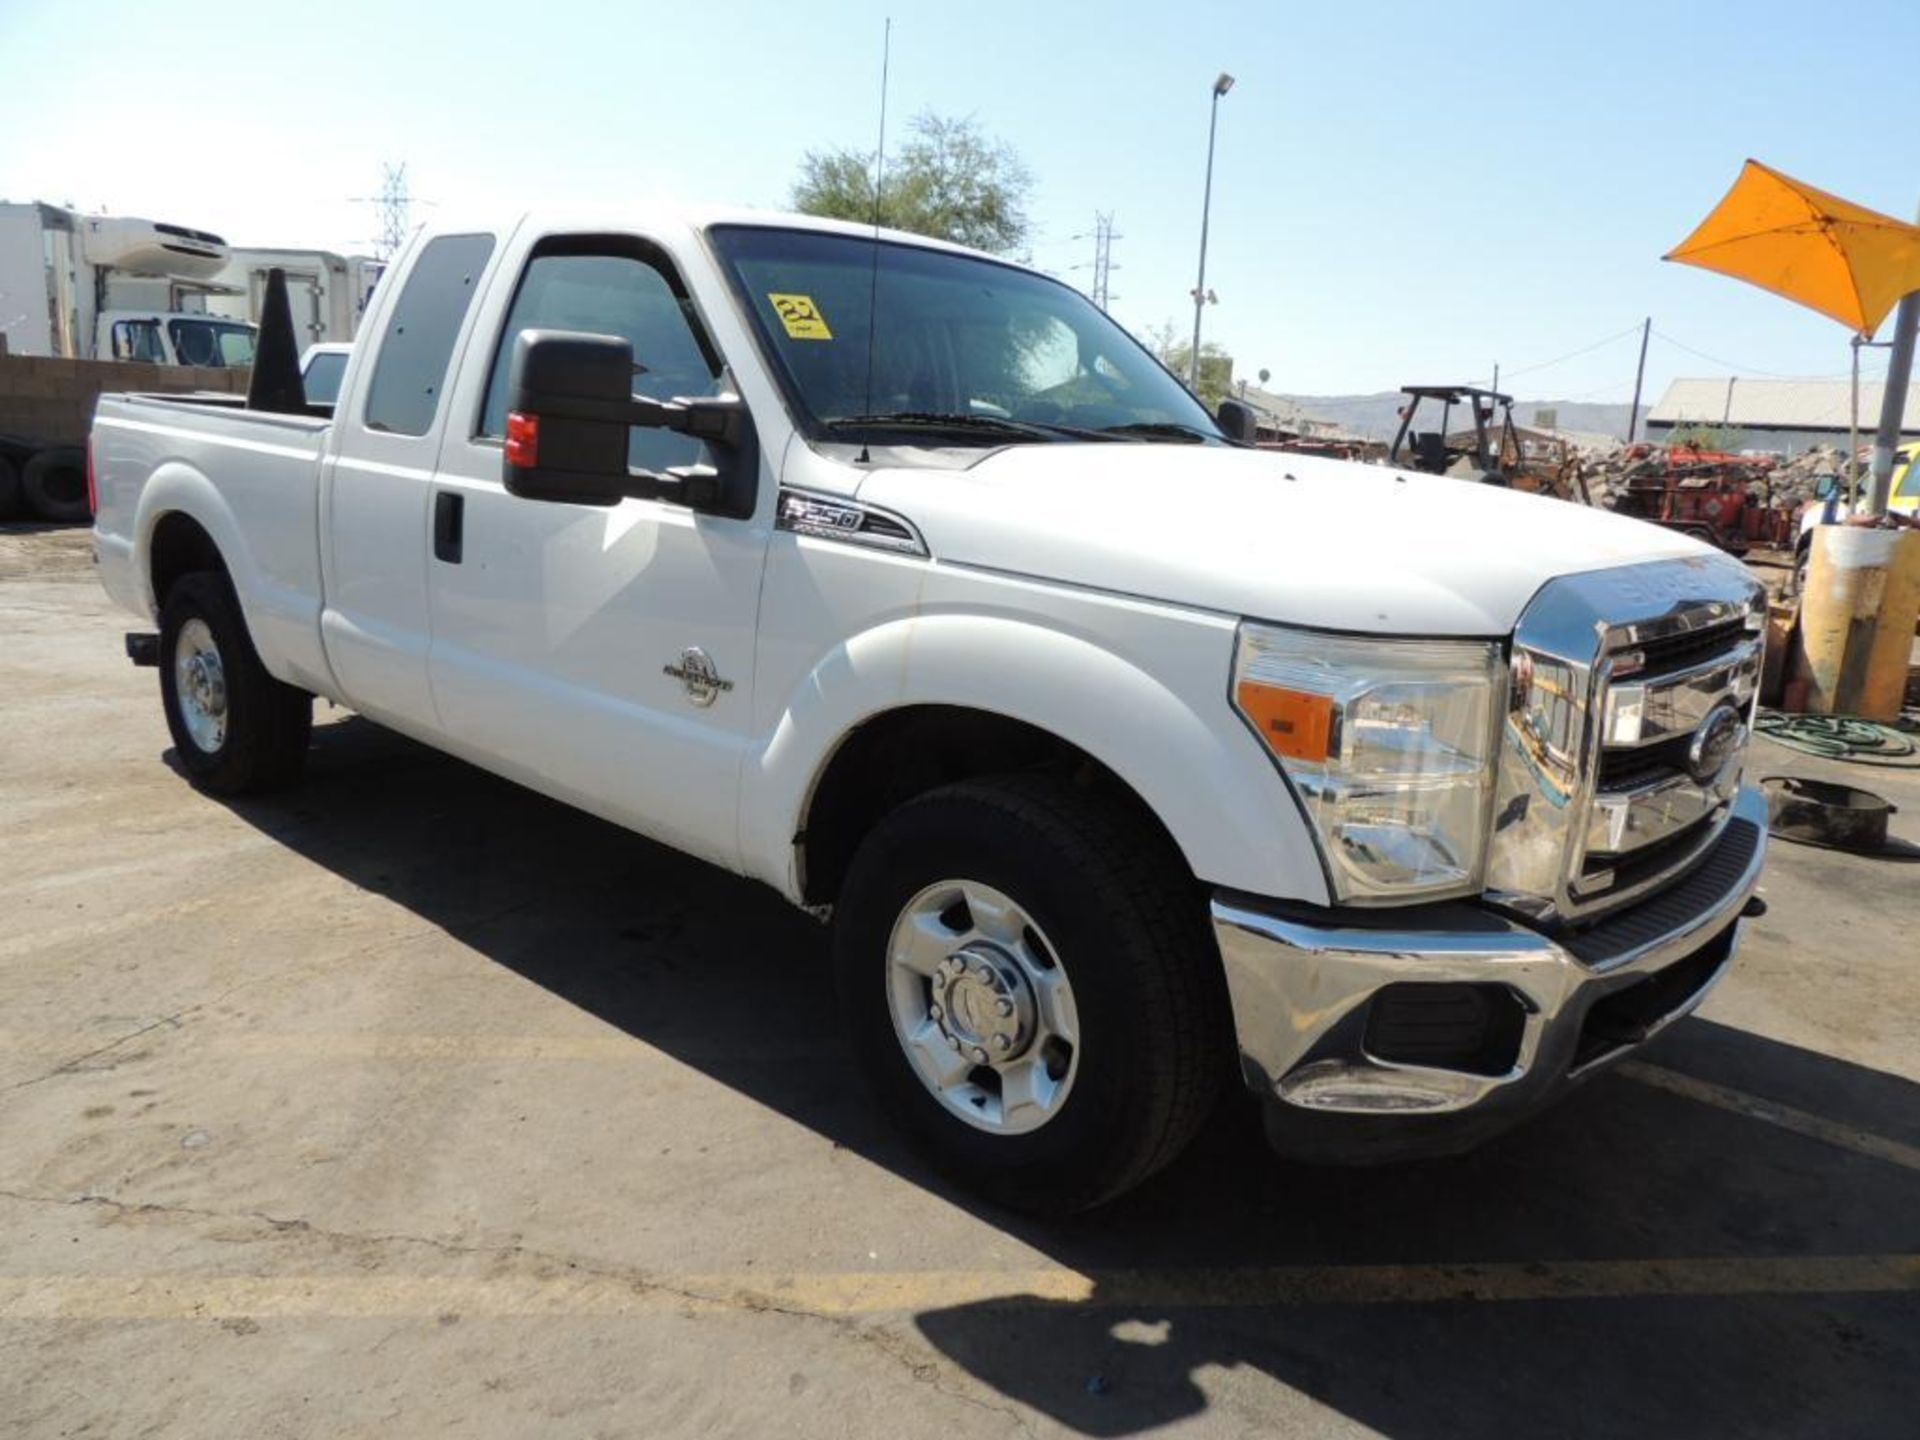 2012 Ford F250 Extended Cab Shortbed 4x2, VIN # 1FT7X2AT8CEB83802, 6.7 Ltr. Auto Trans, 232205 Mi. - Image 2 of 4